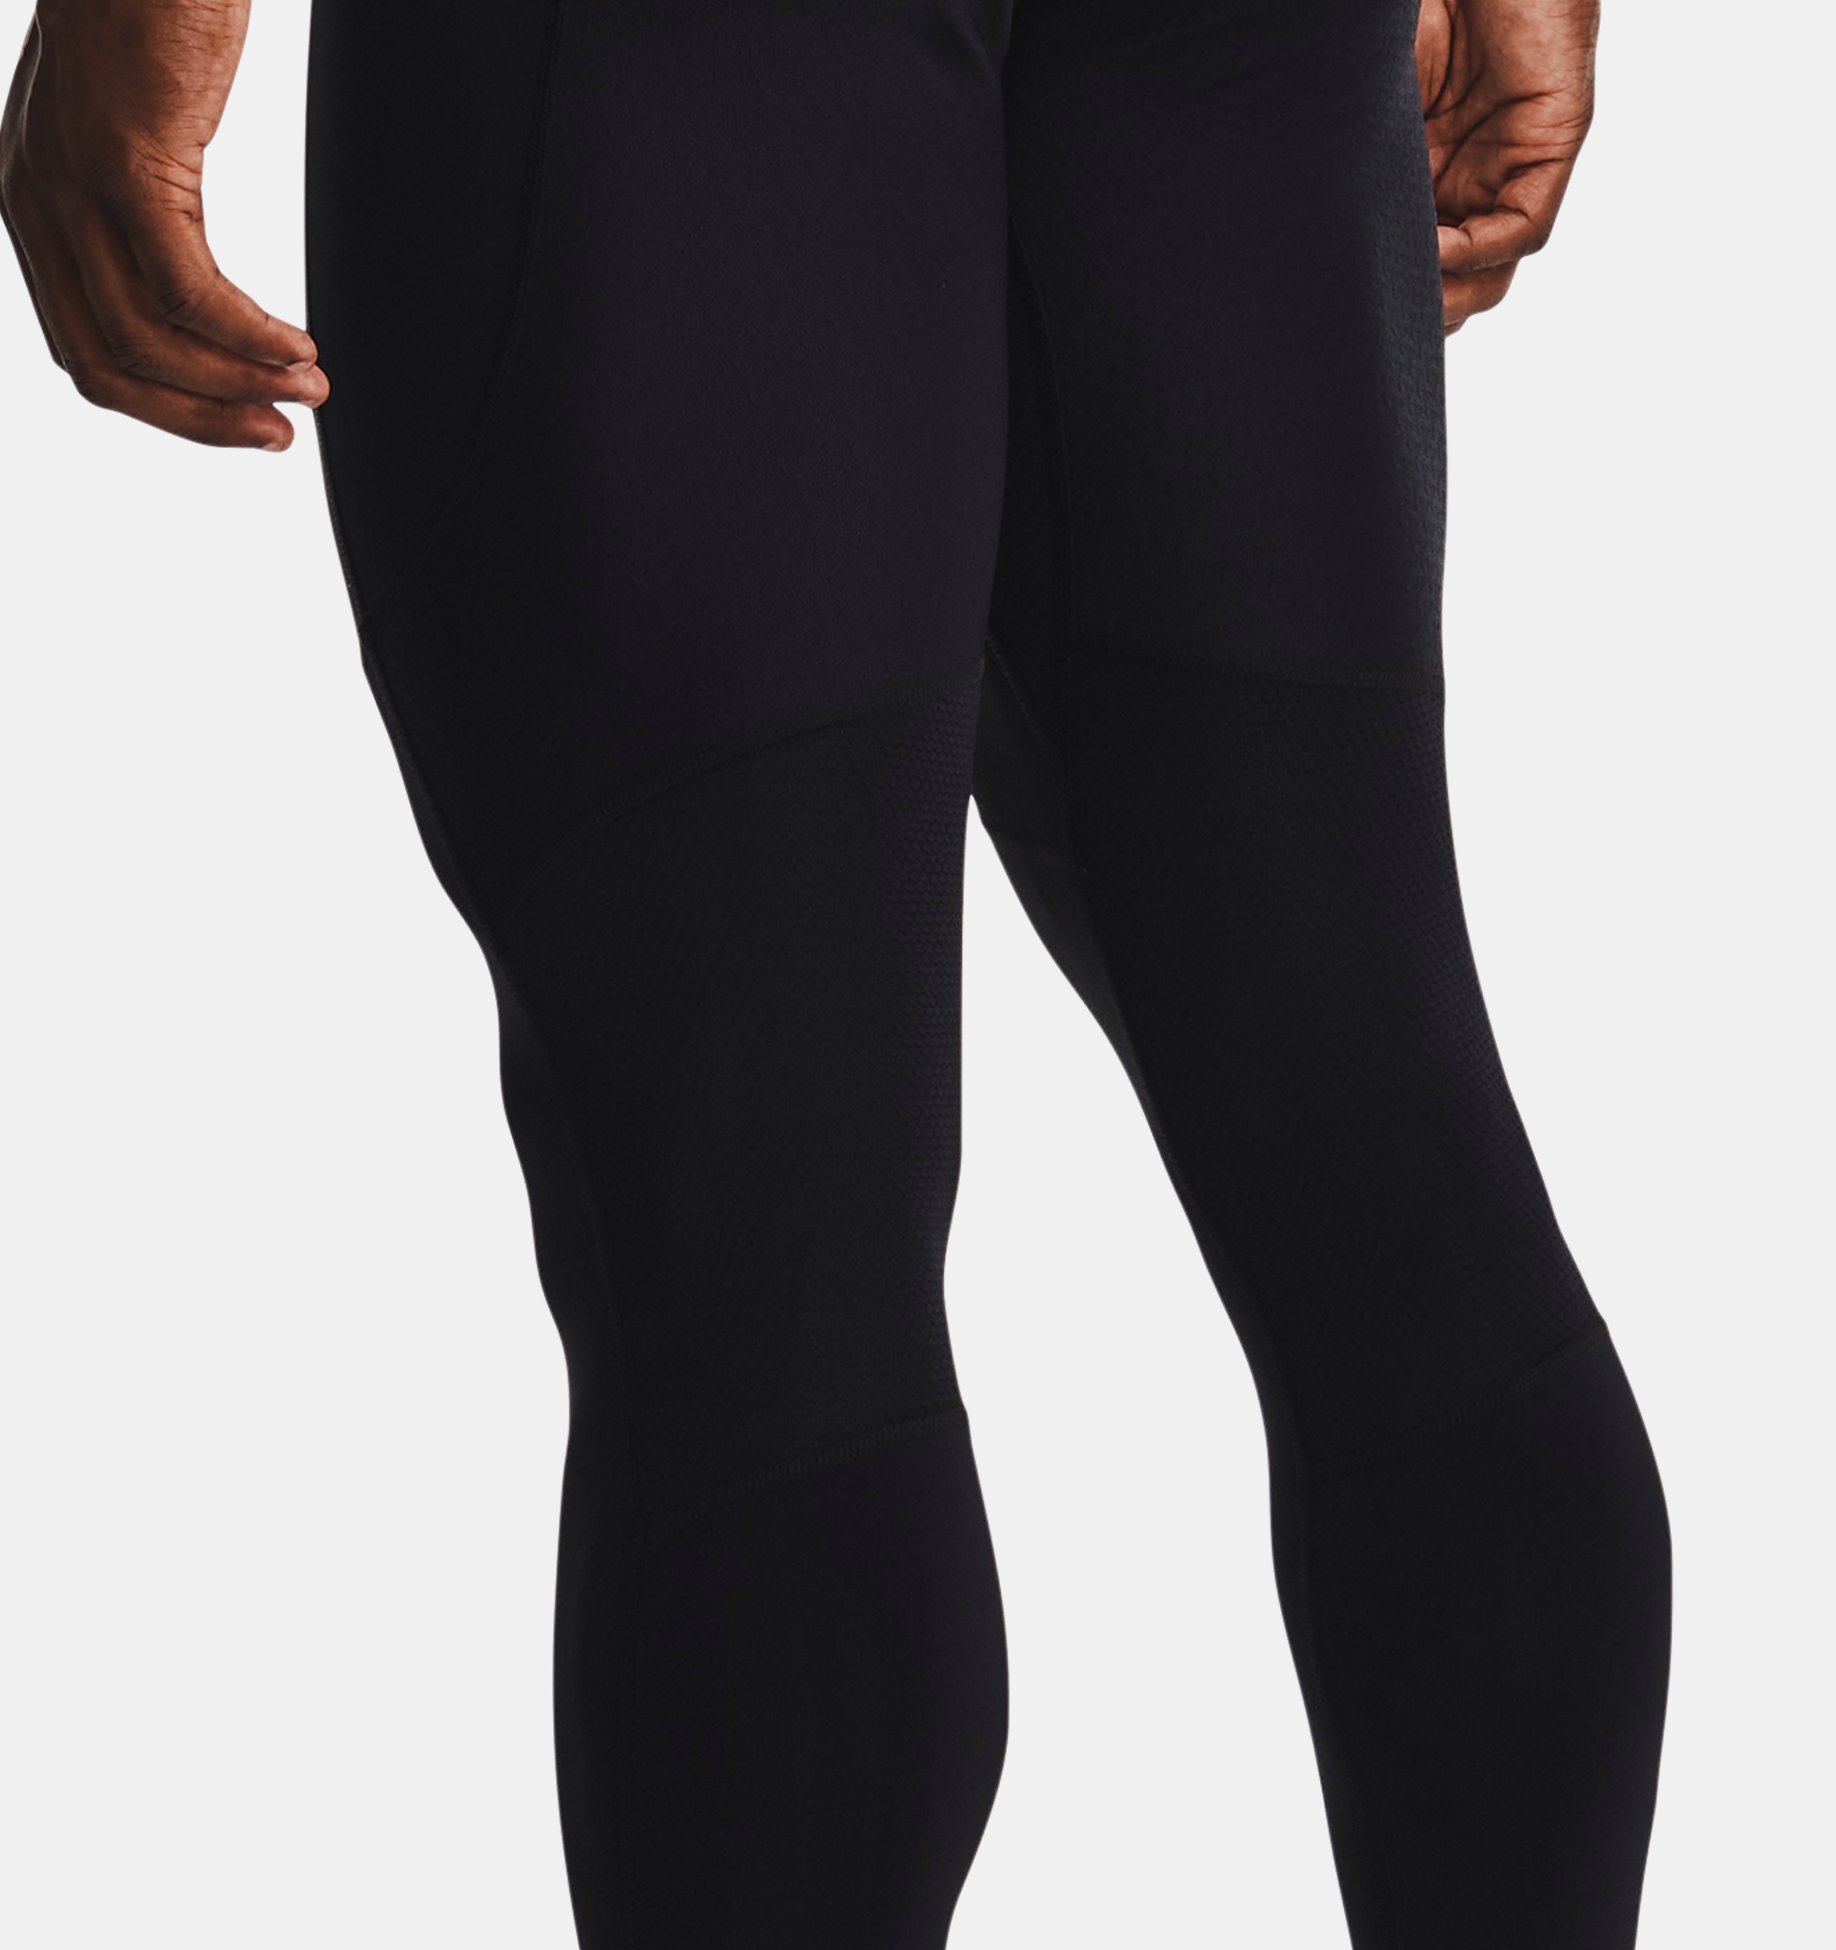 Under Armour Rush Stephen Curry 3/4 Compression Pants Leggings